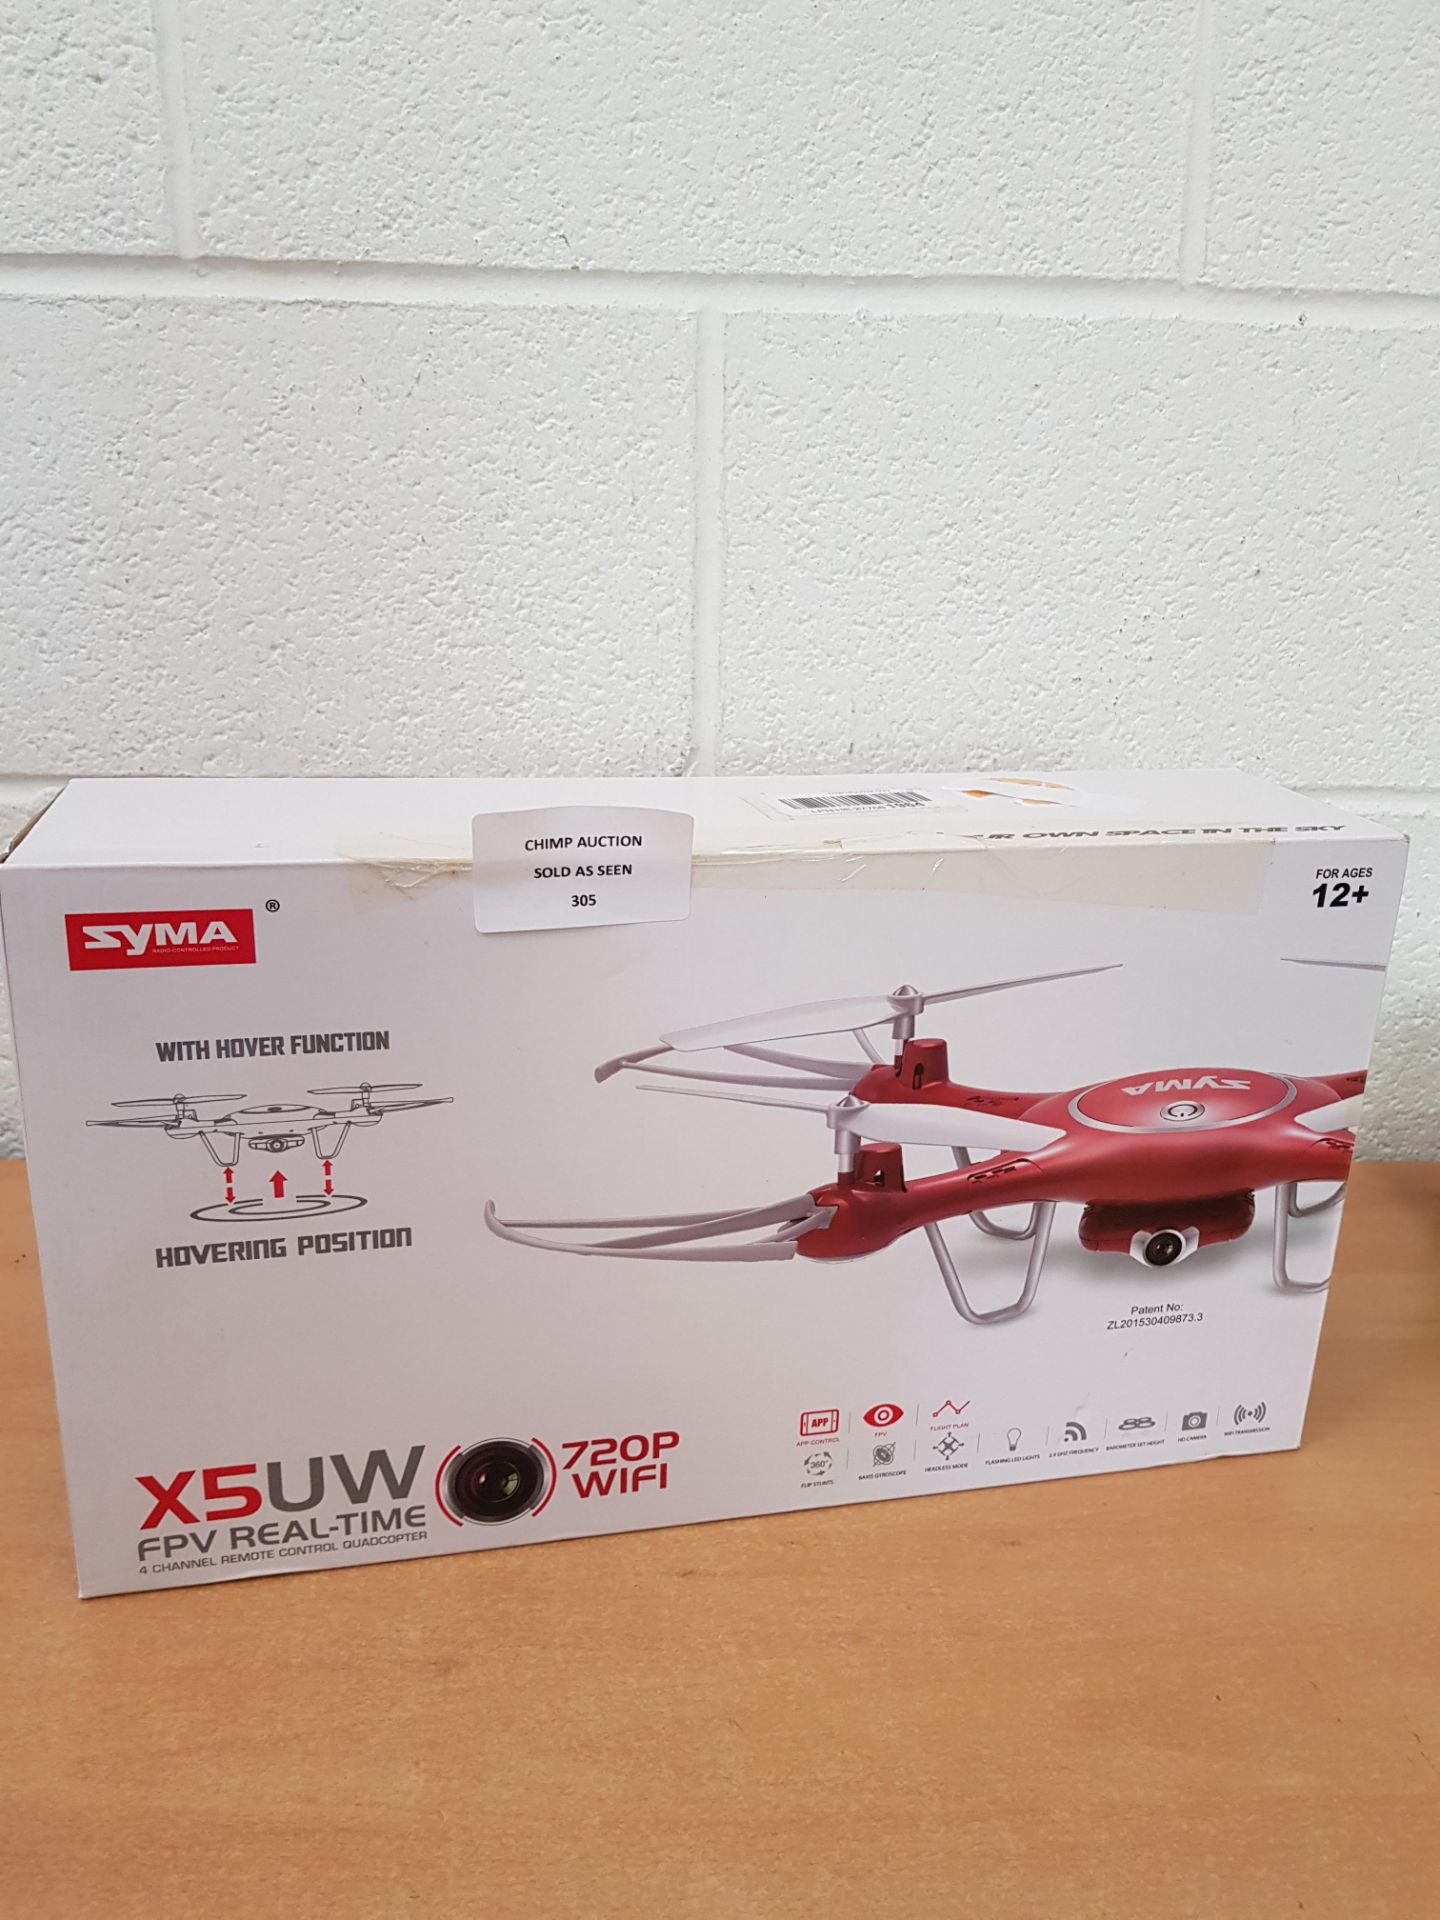 Syma X5UW FVP Real Time Wifi Camera Drone RRP £139.99